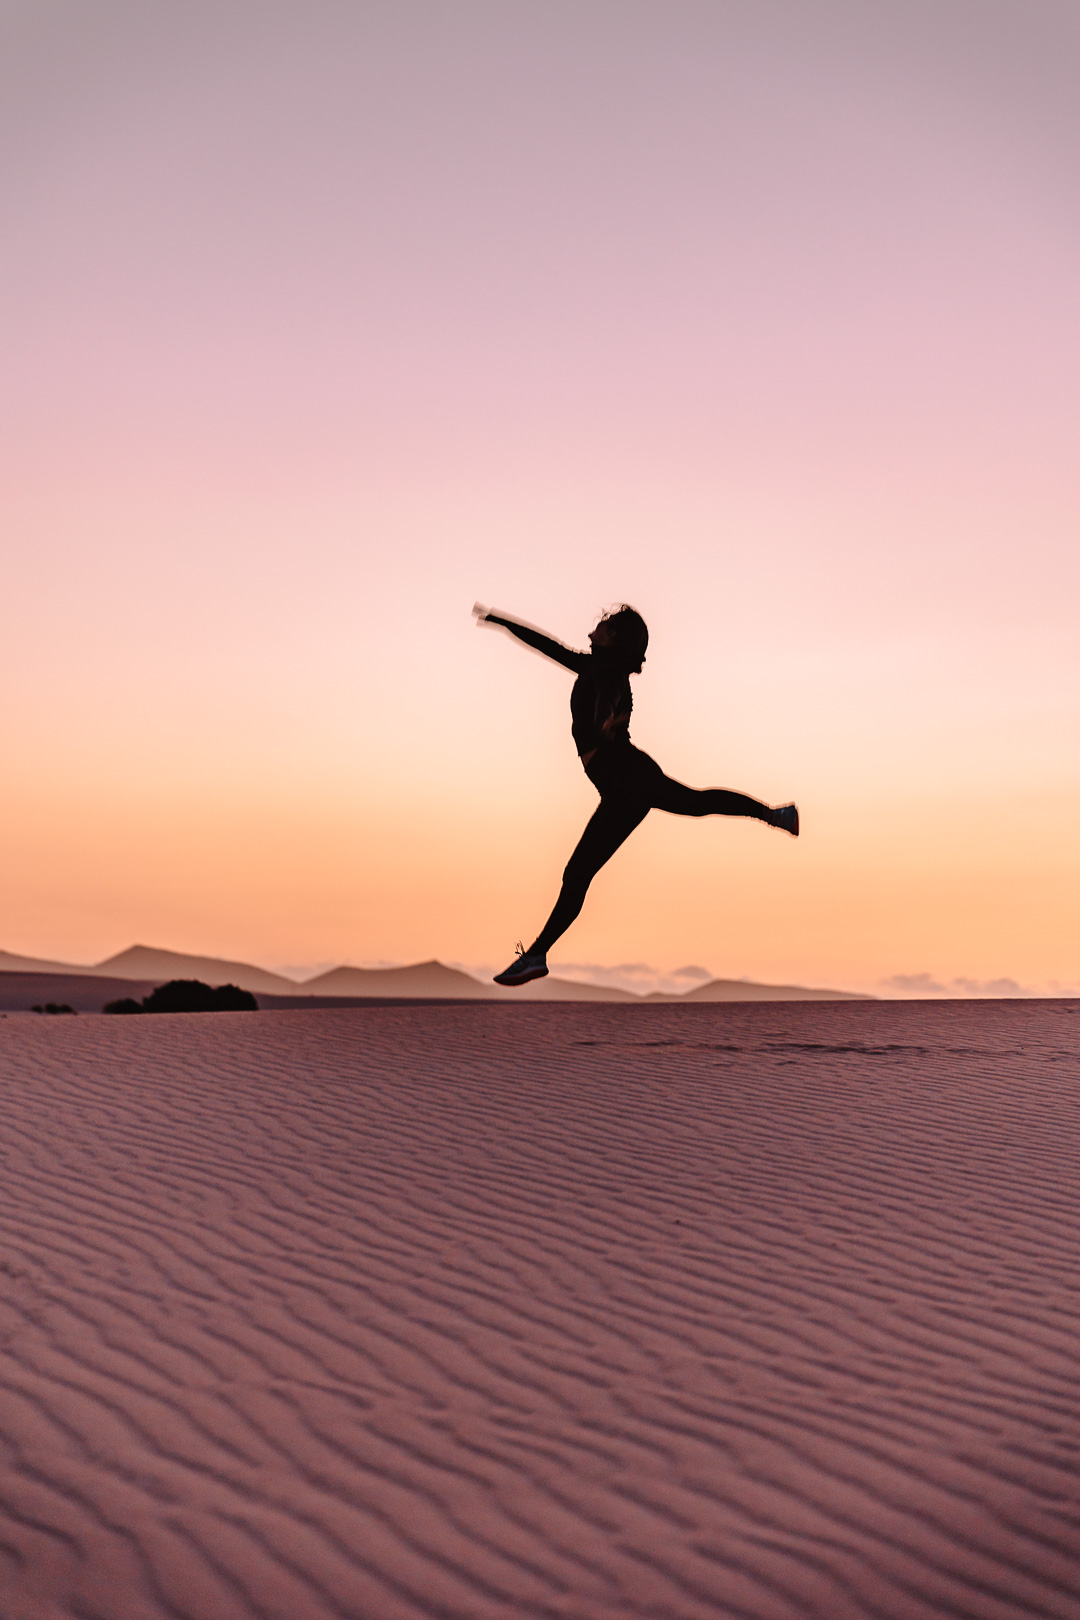 Jumping at sunset on the dunes of Corralejo, by Dancing the Earth